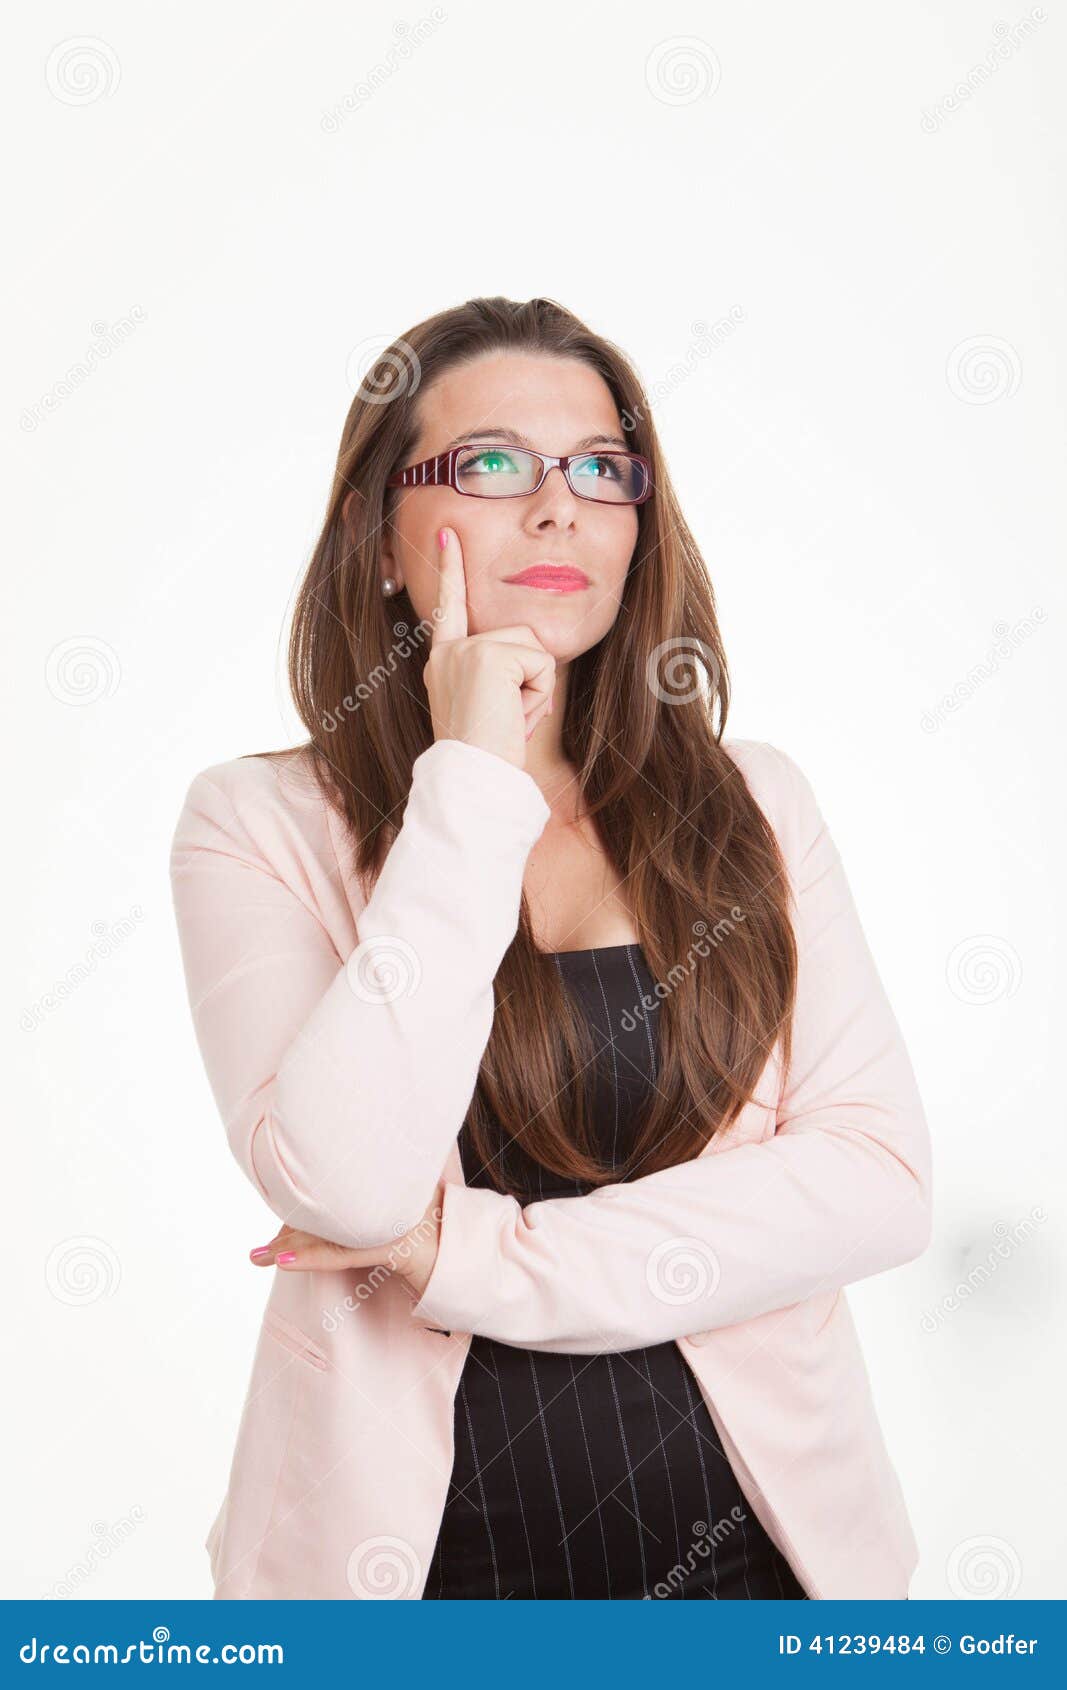 woman thinking pondering making decisions